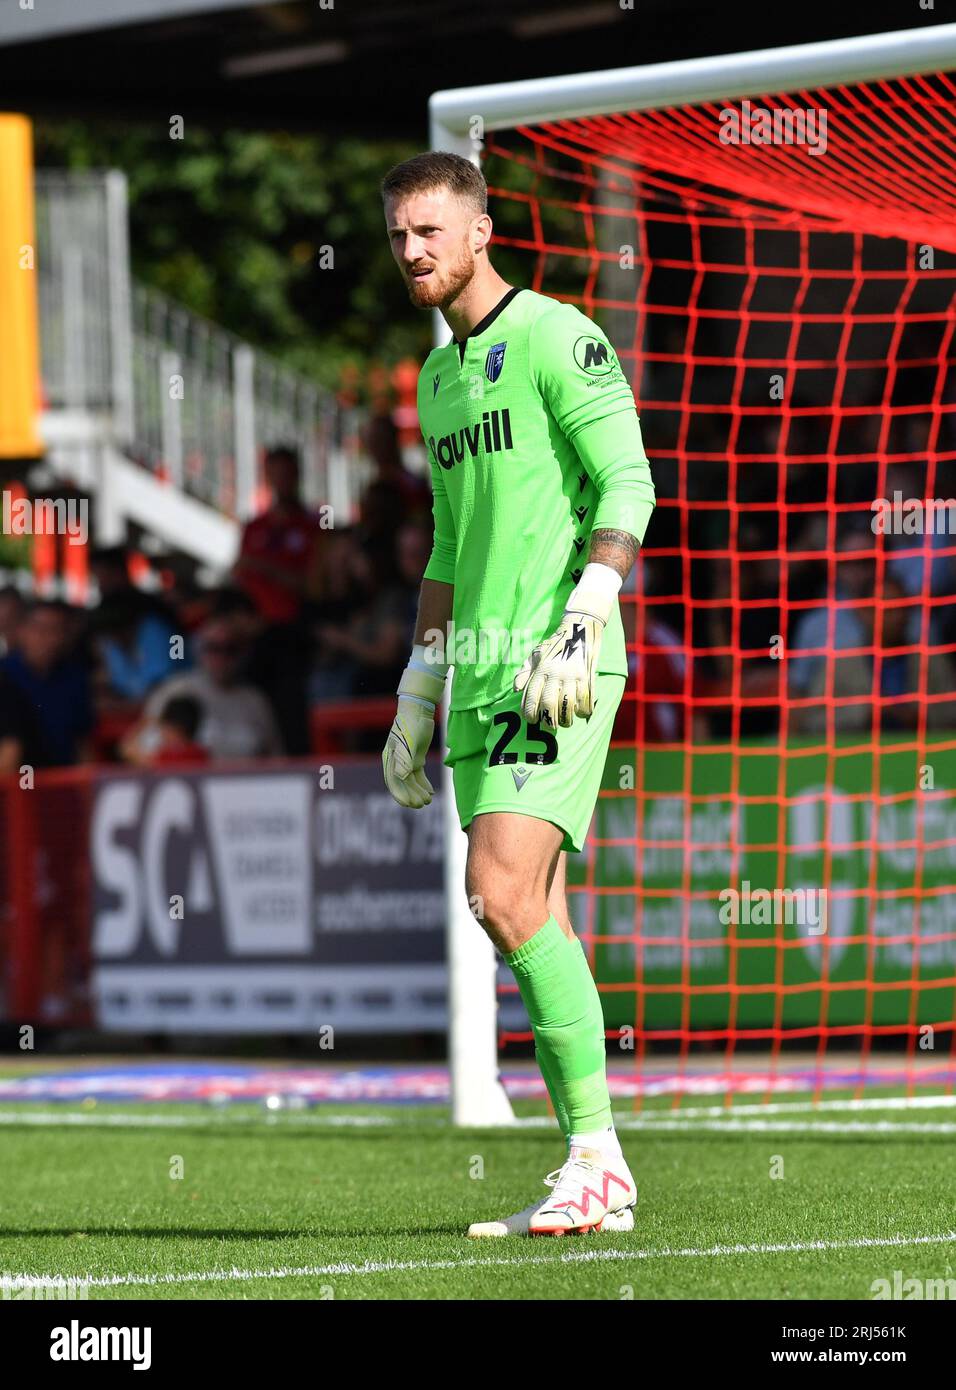 Jake Turner of Gillingham during the Sky Bet EFL League Two match between Crawley Town and Gillingham at the Broadfield Stadium  , Crawley , UK - 19th August 2023 Photo Simon Dack / Telephoto Images Editorial use only. No merchandising. For Football images FA and Premier League restrictions apply inc. no internet/mobile usage without FAPL license - for details contact Football Dataco Stock Photo